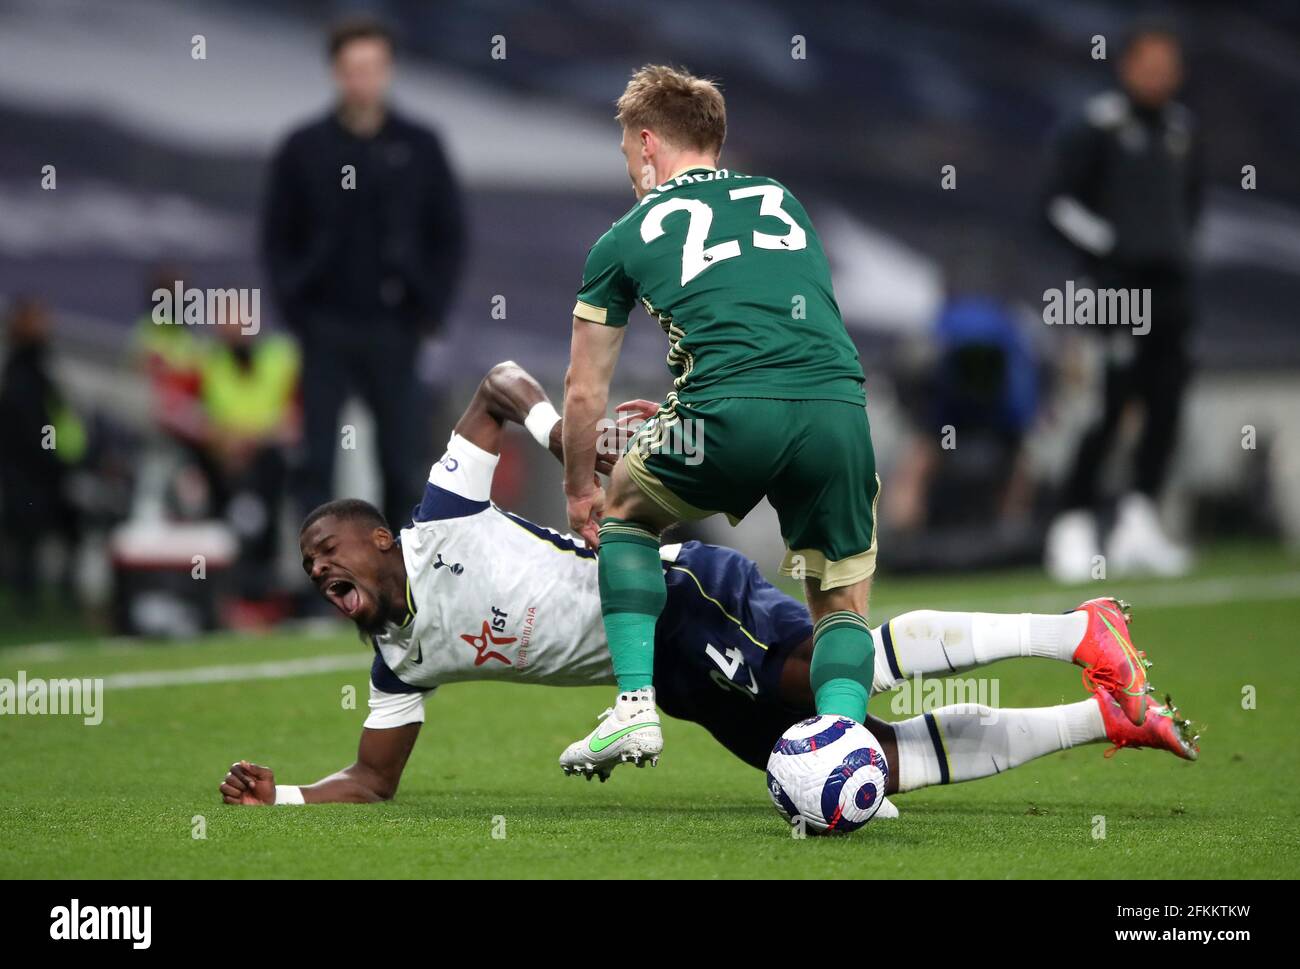 Sheffield United's Ben Osborn tackles Tottenham Hotspur's Serge Aurier during the Premier League match at the Tottenham Hotspur Stadium, London. Issue date: Sunday May 2, 2021. Stock Photo